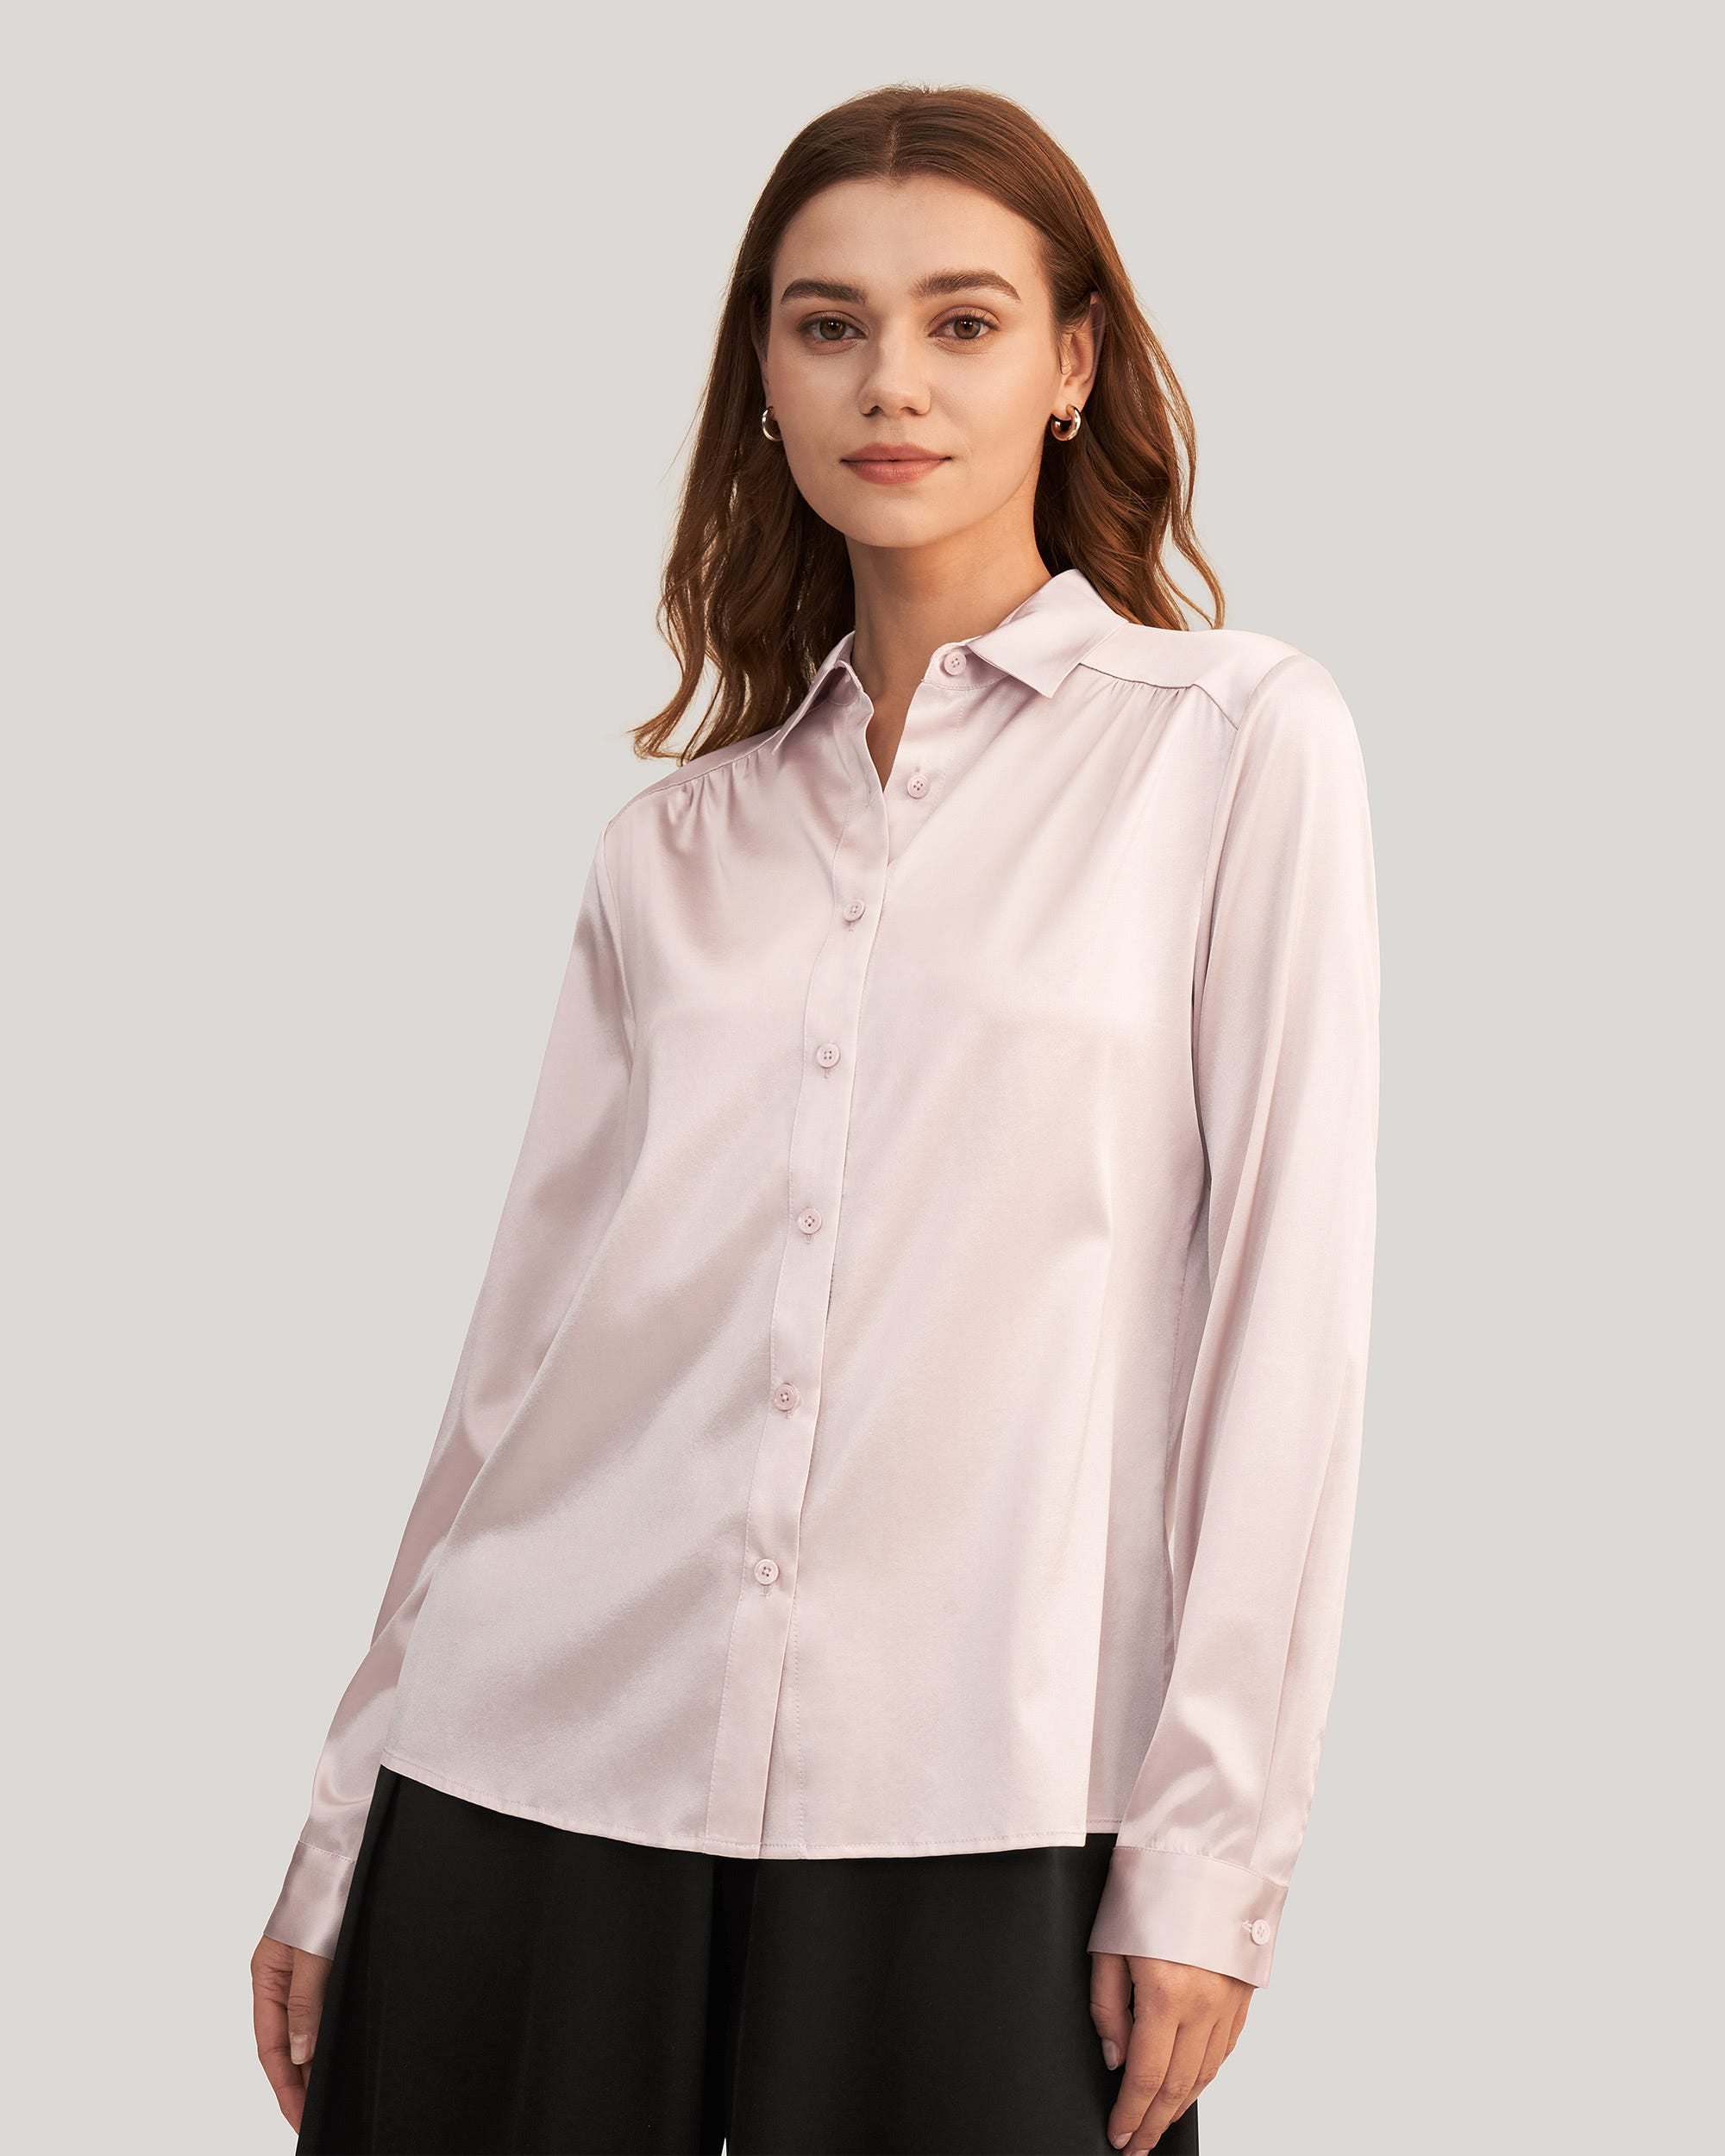 Women's Silk Blouses Sale Up to 65% Off